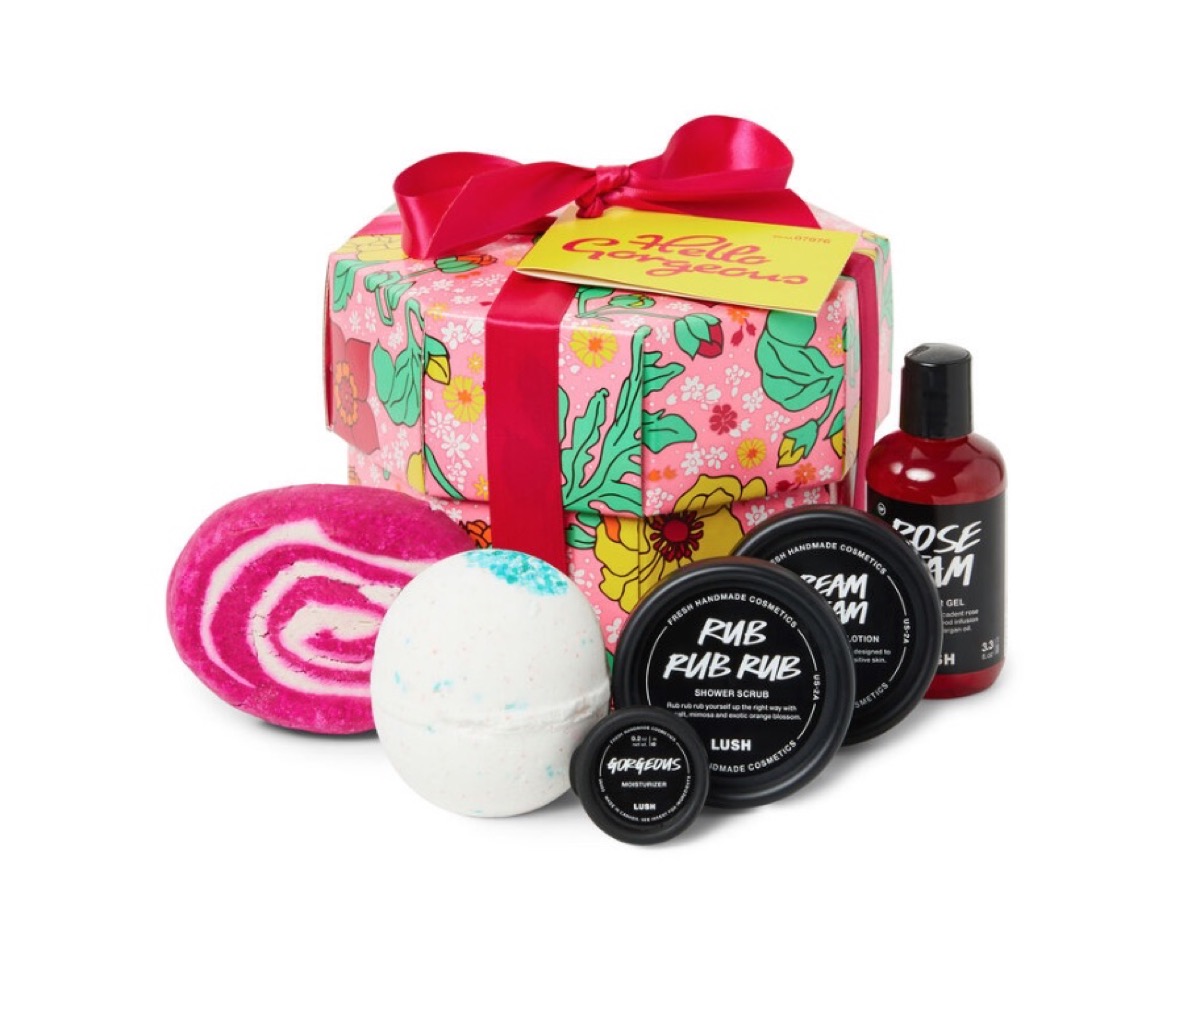 lush gift set with bath bombs, shower gel, moisturizer, and scrub in front of floral gift box